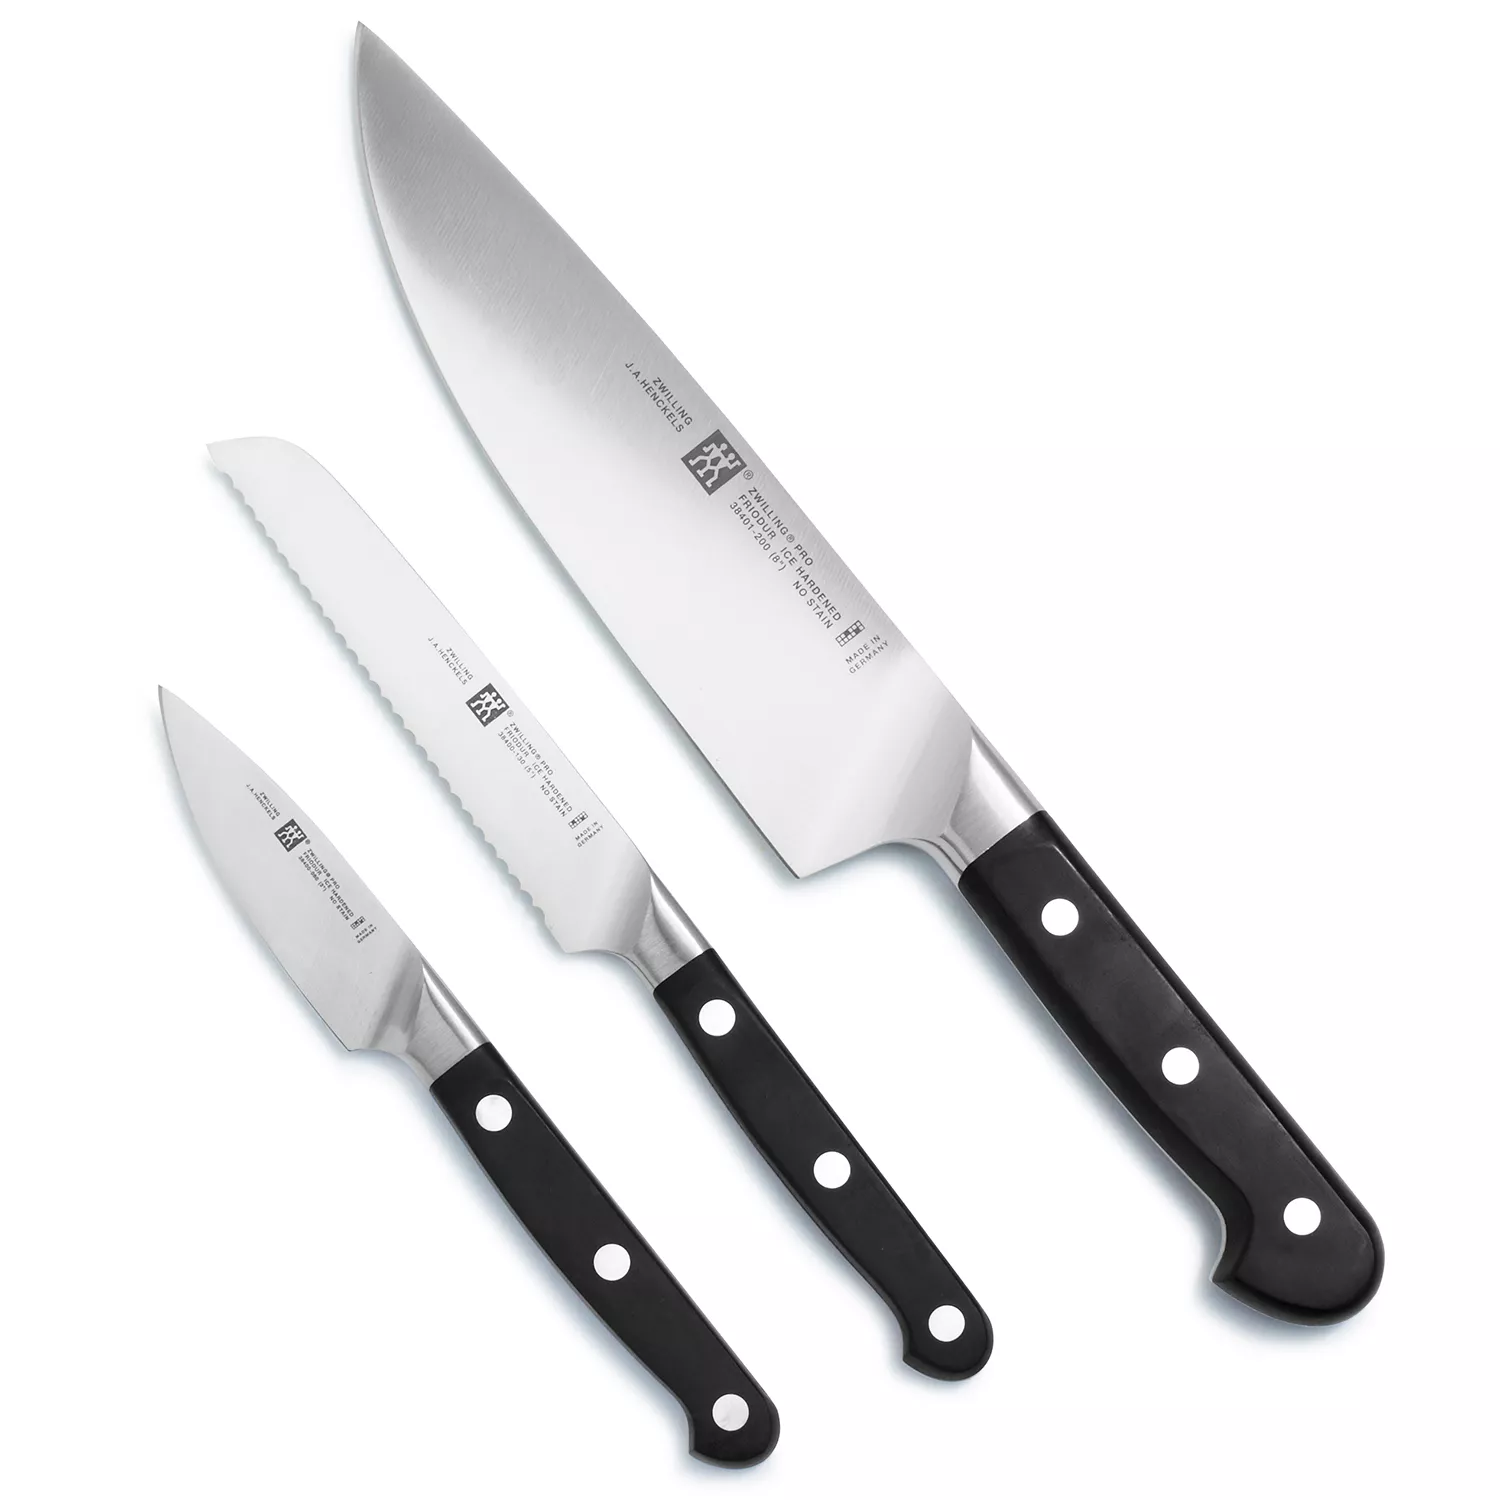 Fat Kid Deals on X: Kitchen Knife Set for $11.99! Save 80% with